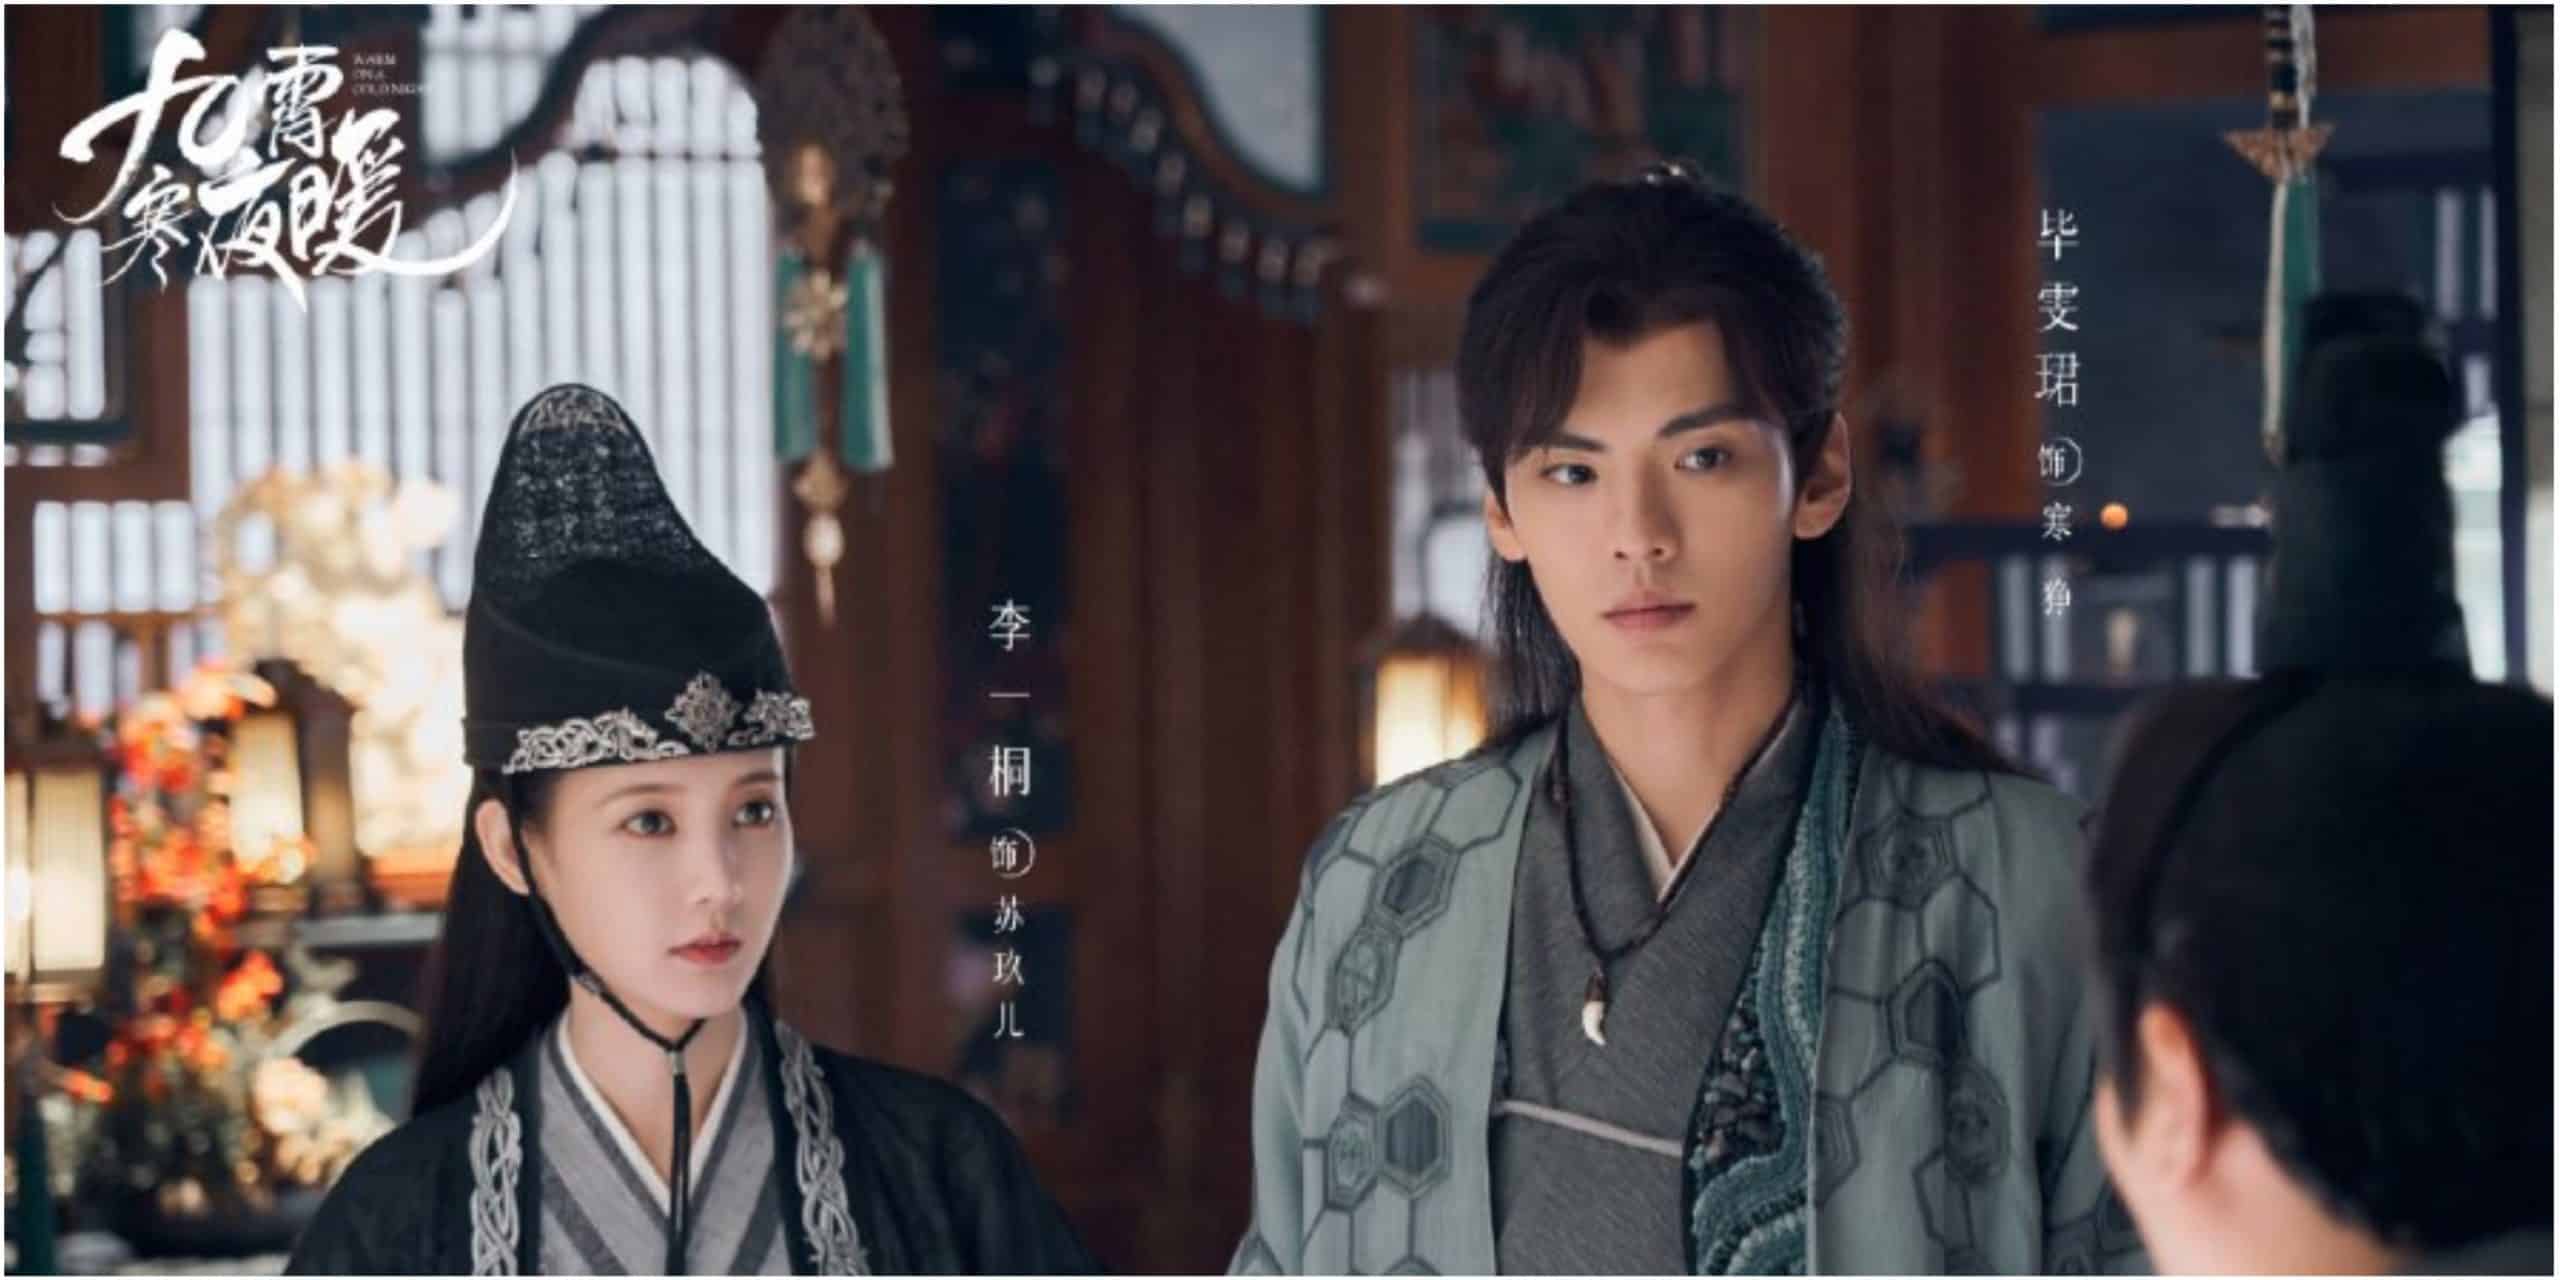 Warm on a Cold Night Chinese Drama Episode 34 Synopsis